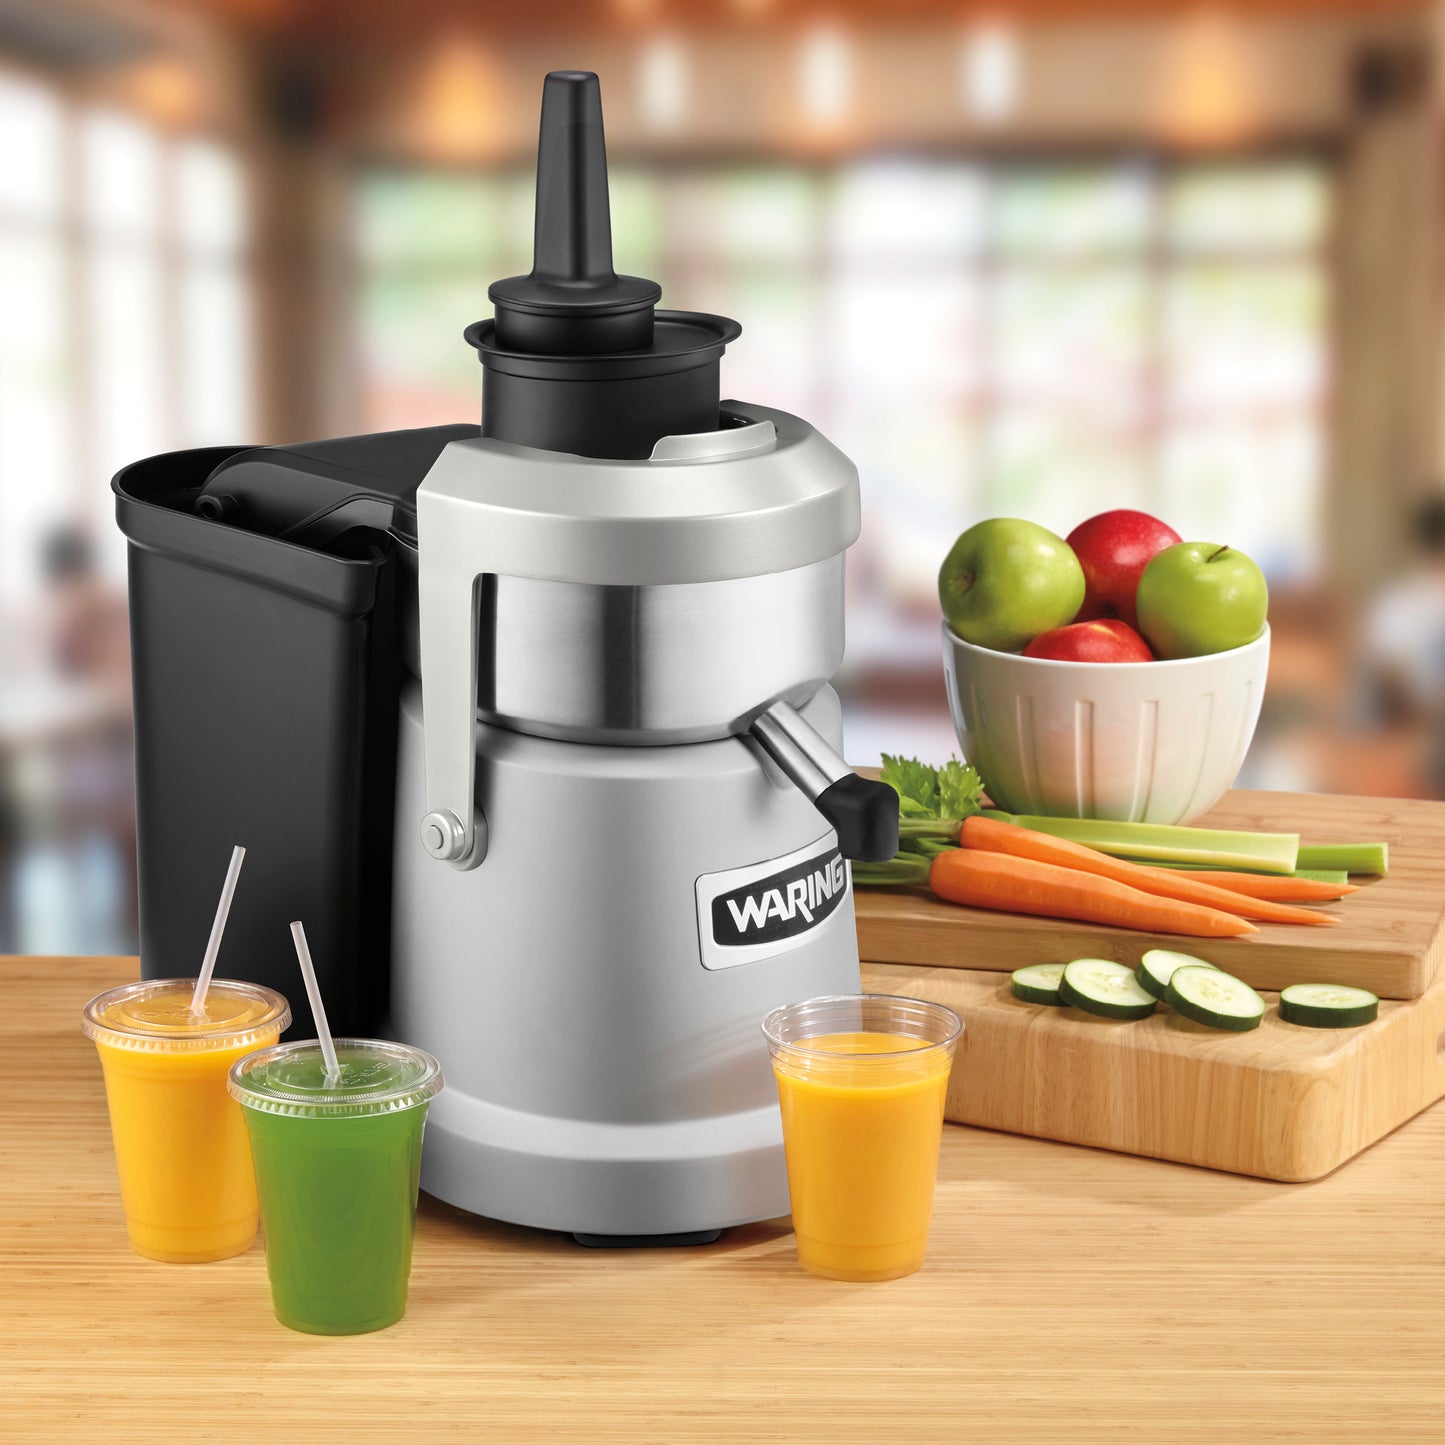 Waring WJX80X Heavy-Duty Pulp-Eject Juice Extractor